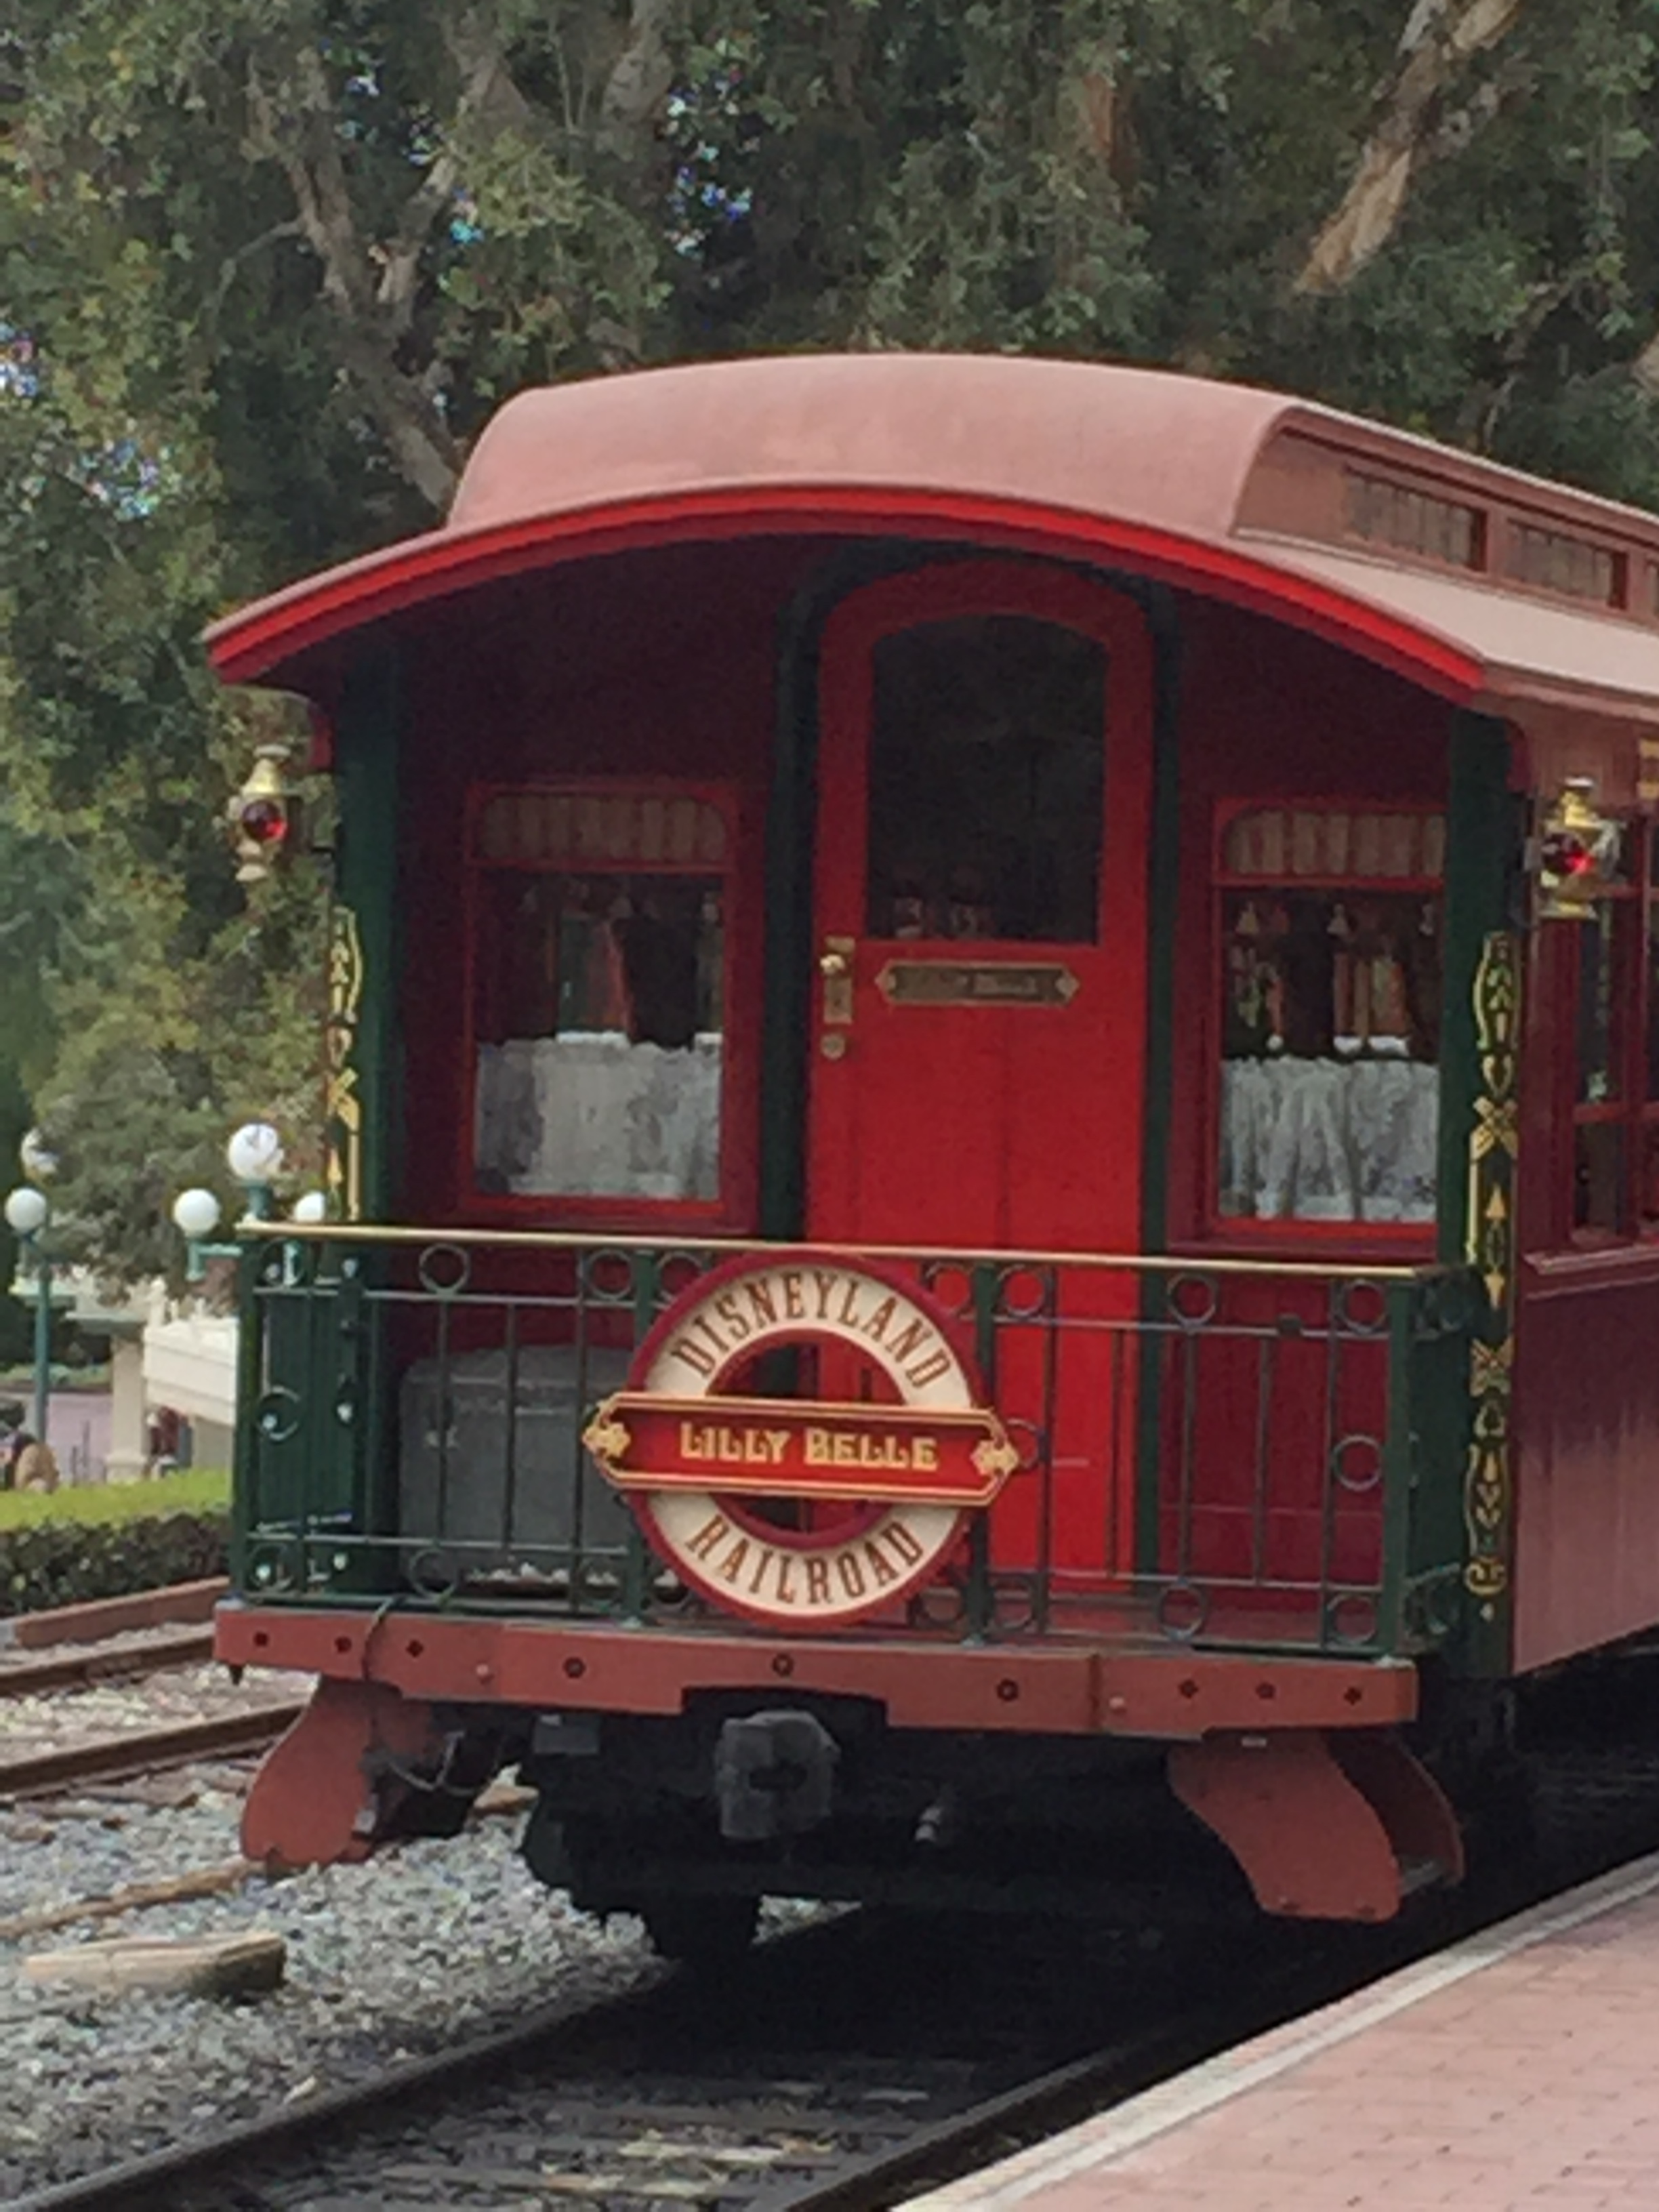 Experiencing the Lilly Belle